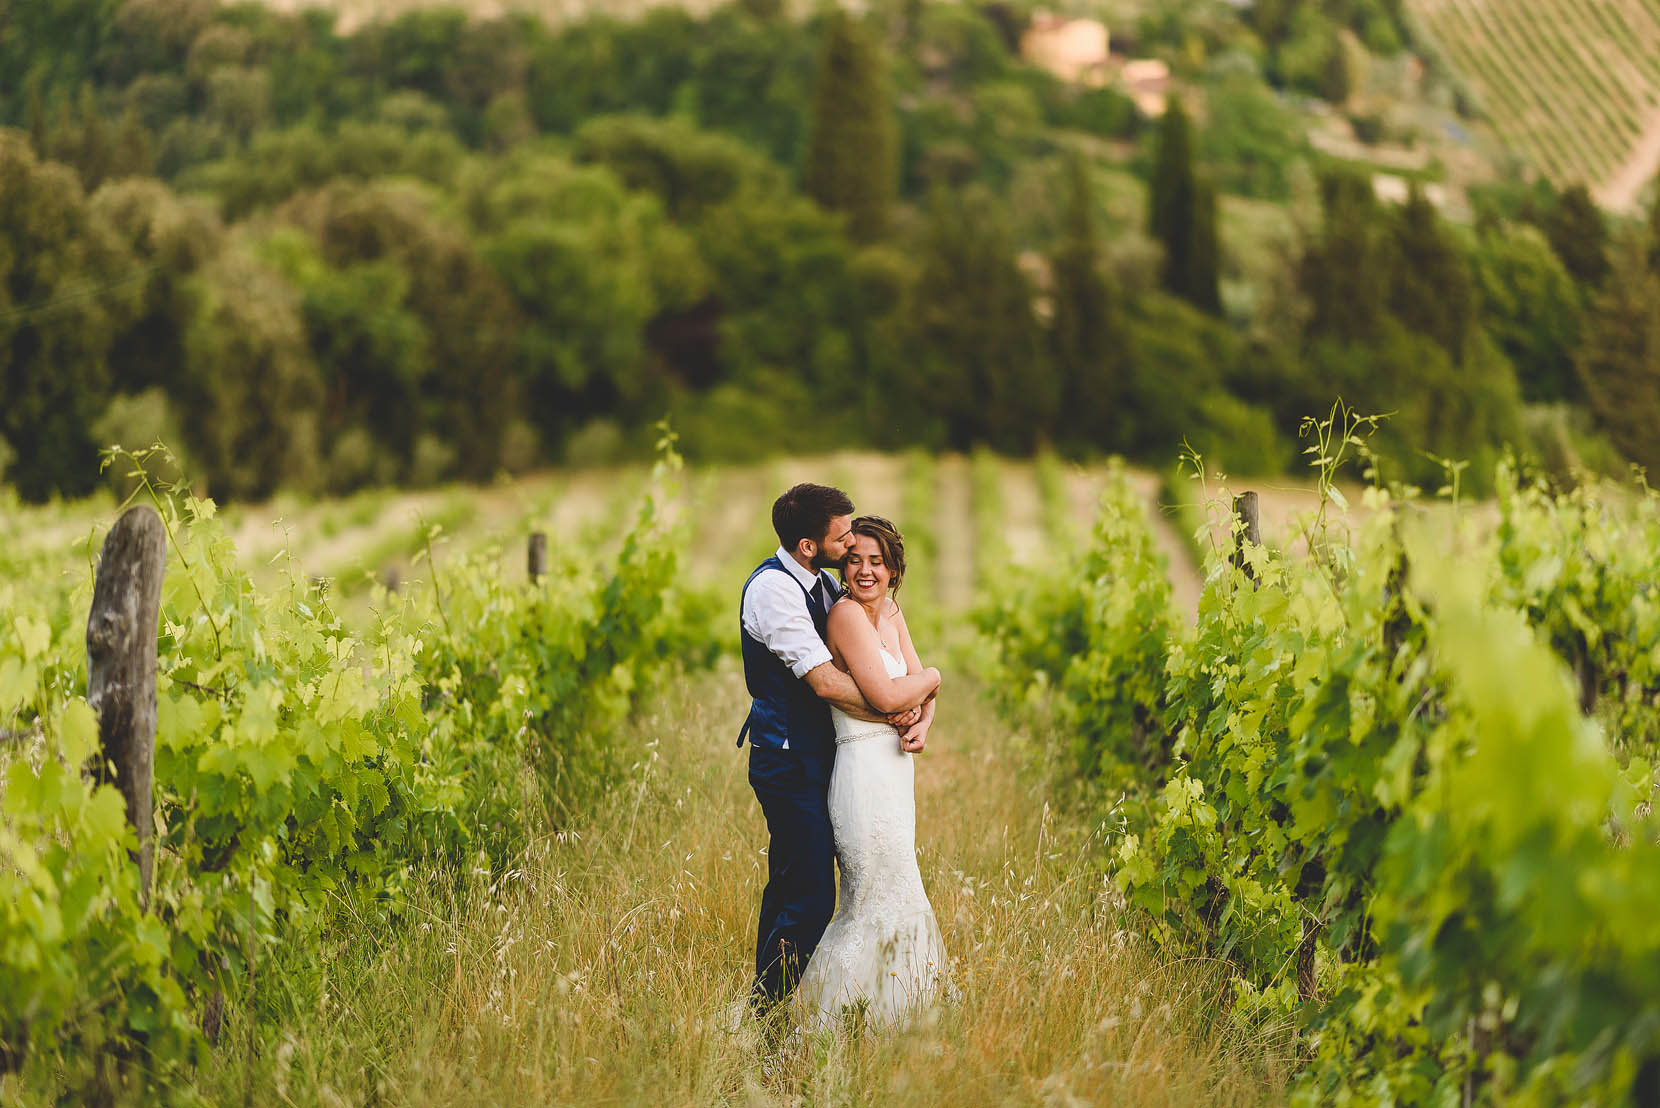 wedding photography in tuscany with bride and groom in a vineyard